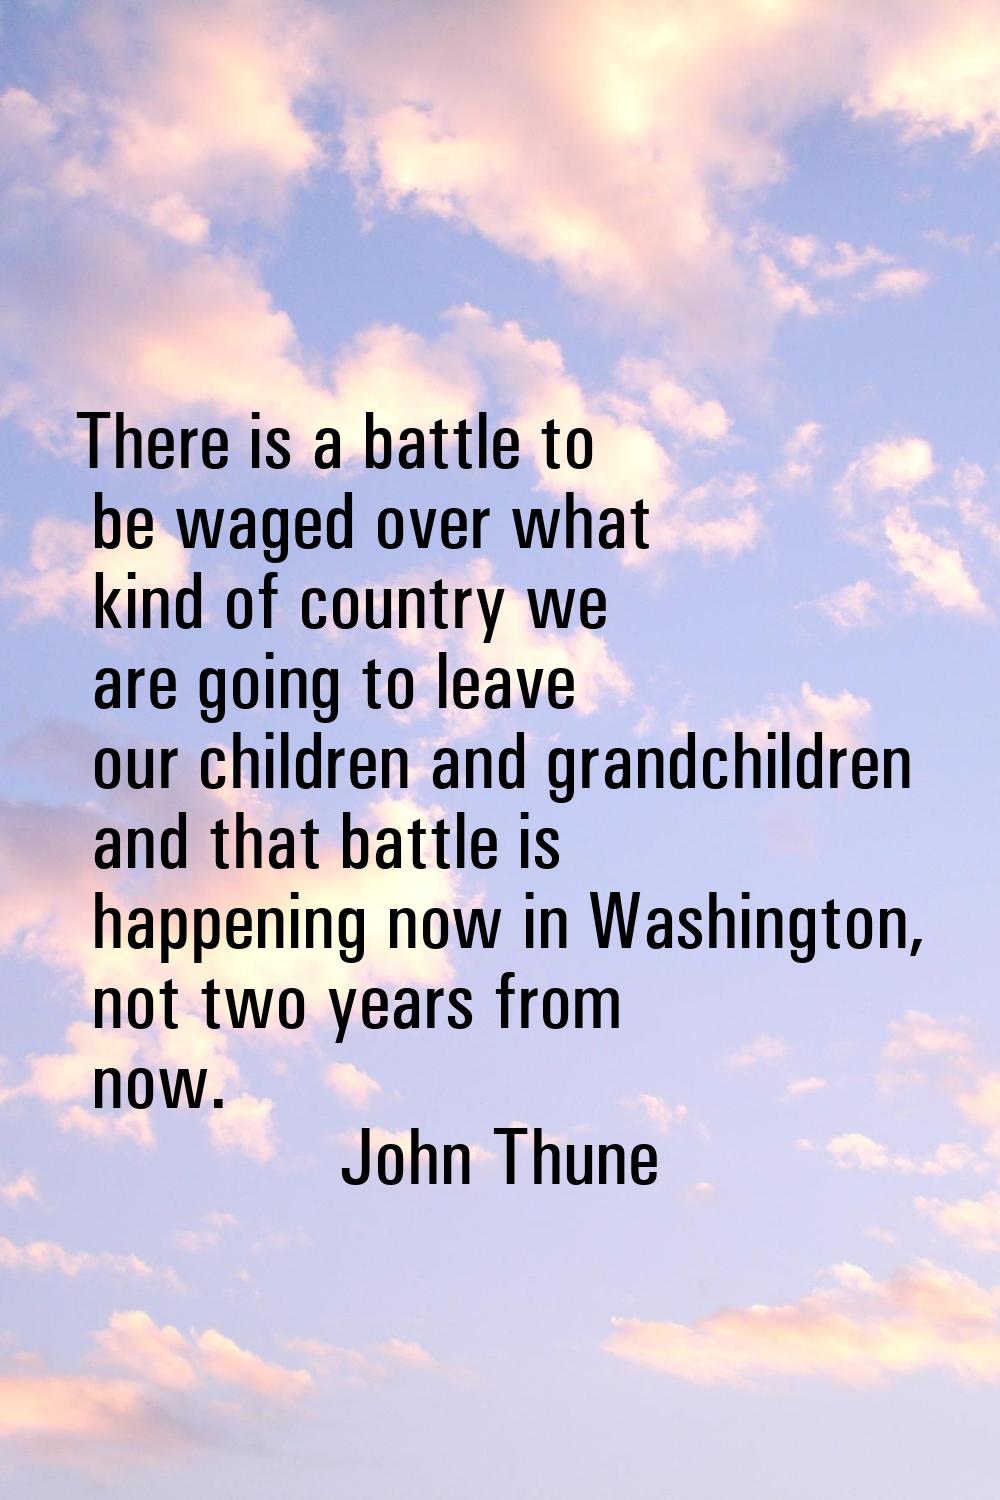 There is a battle to be waged over what kind of country we are going to leave our children and gran